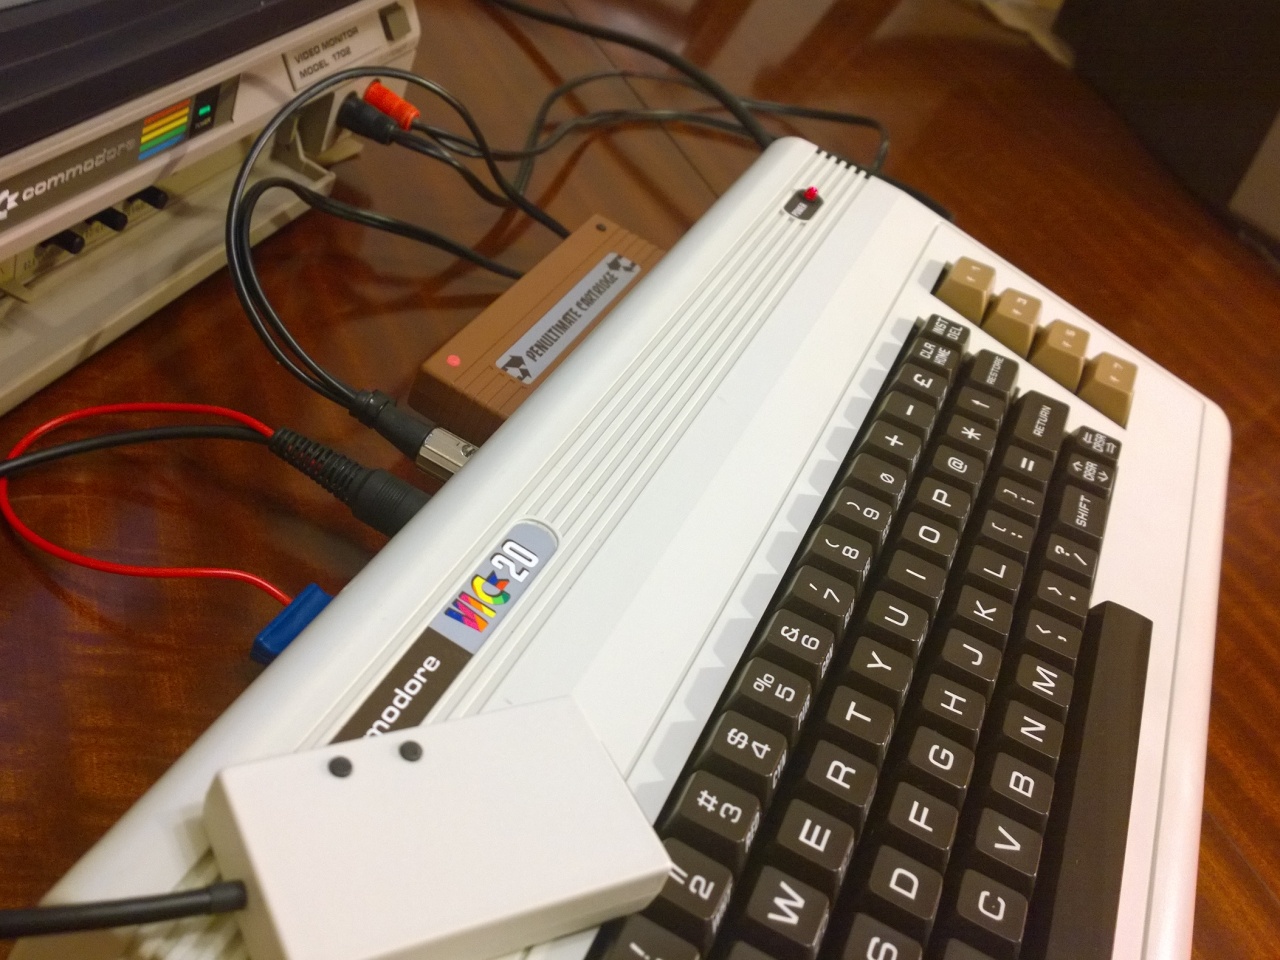 You don't have to have a SD2IEC to use the Penultimate Cartridge, but of course they make a perfect companion for your VIC20;D